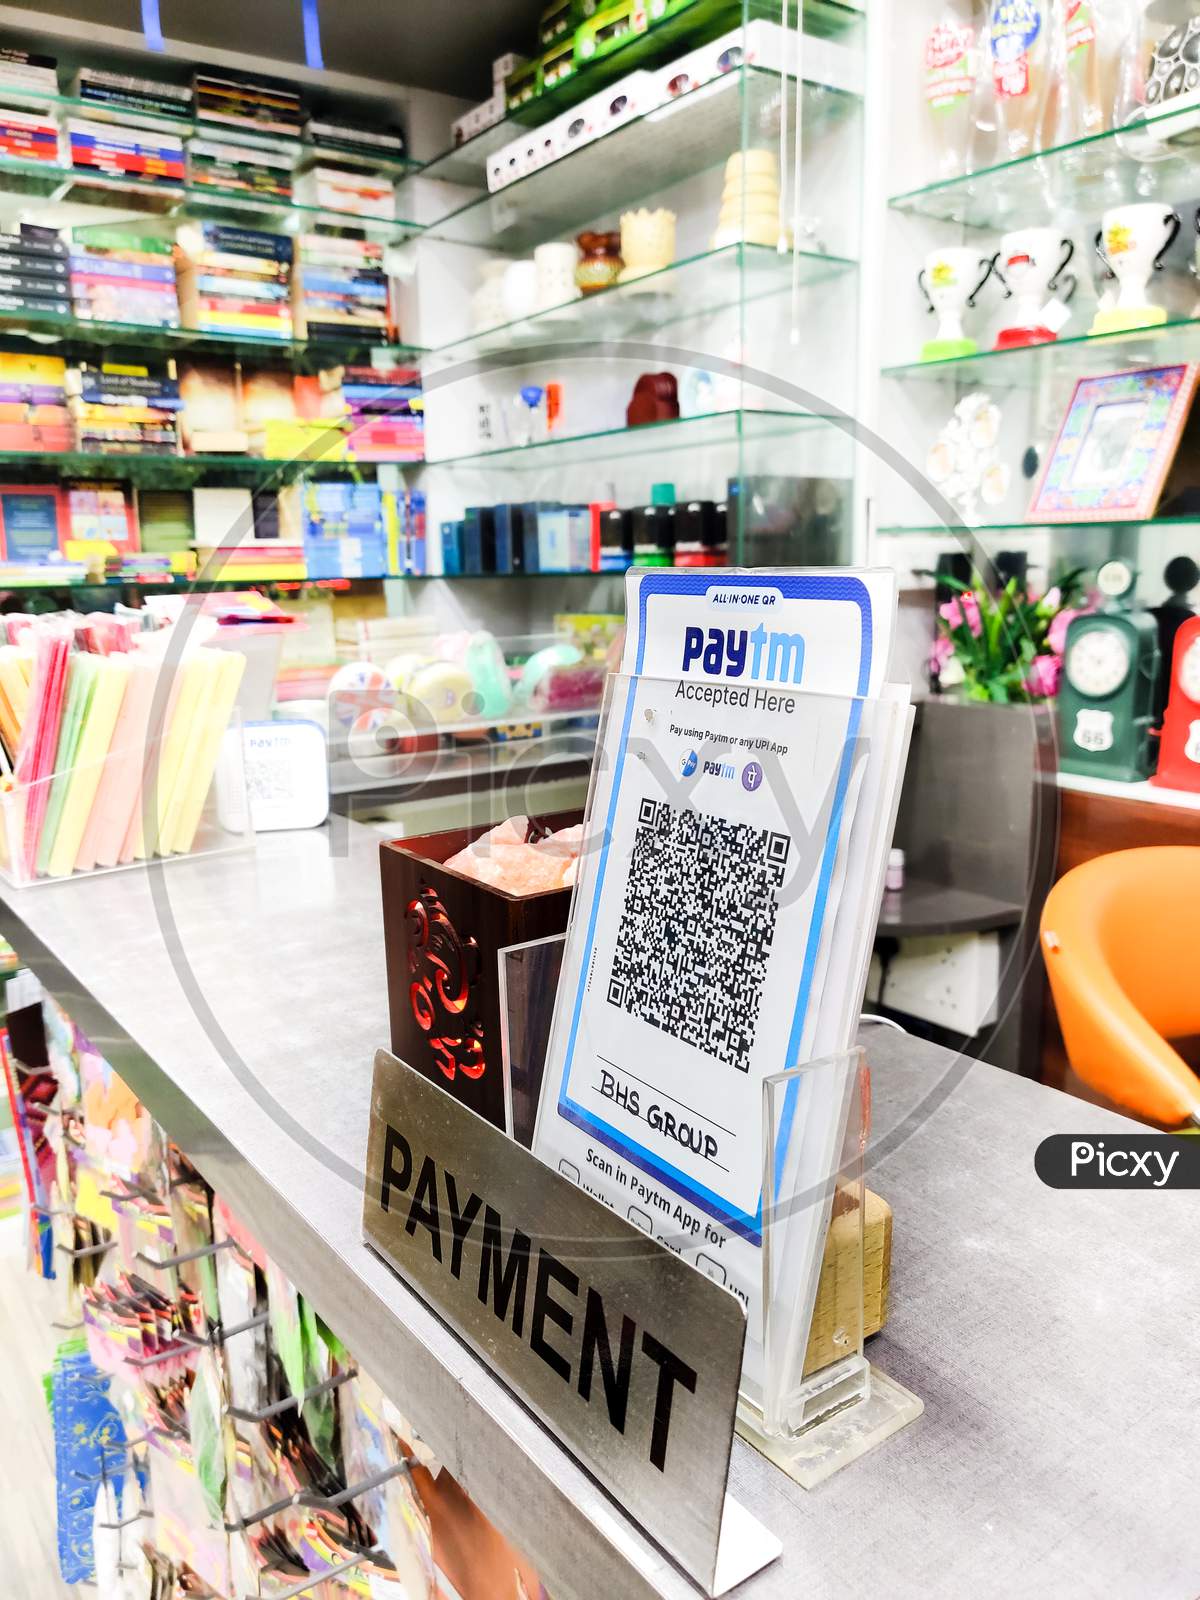 Placement Of A Payment Qr Code At A Store Allowing Payment Through Paytm Wallet, Bhim, Google Pay, Amazon Pay And More Options Showing India Moving To Cashless, Contactless Payment In The Covid19 Pandemic